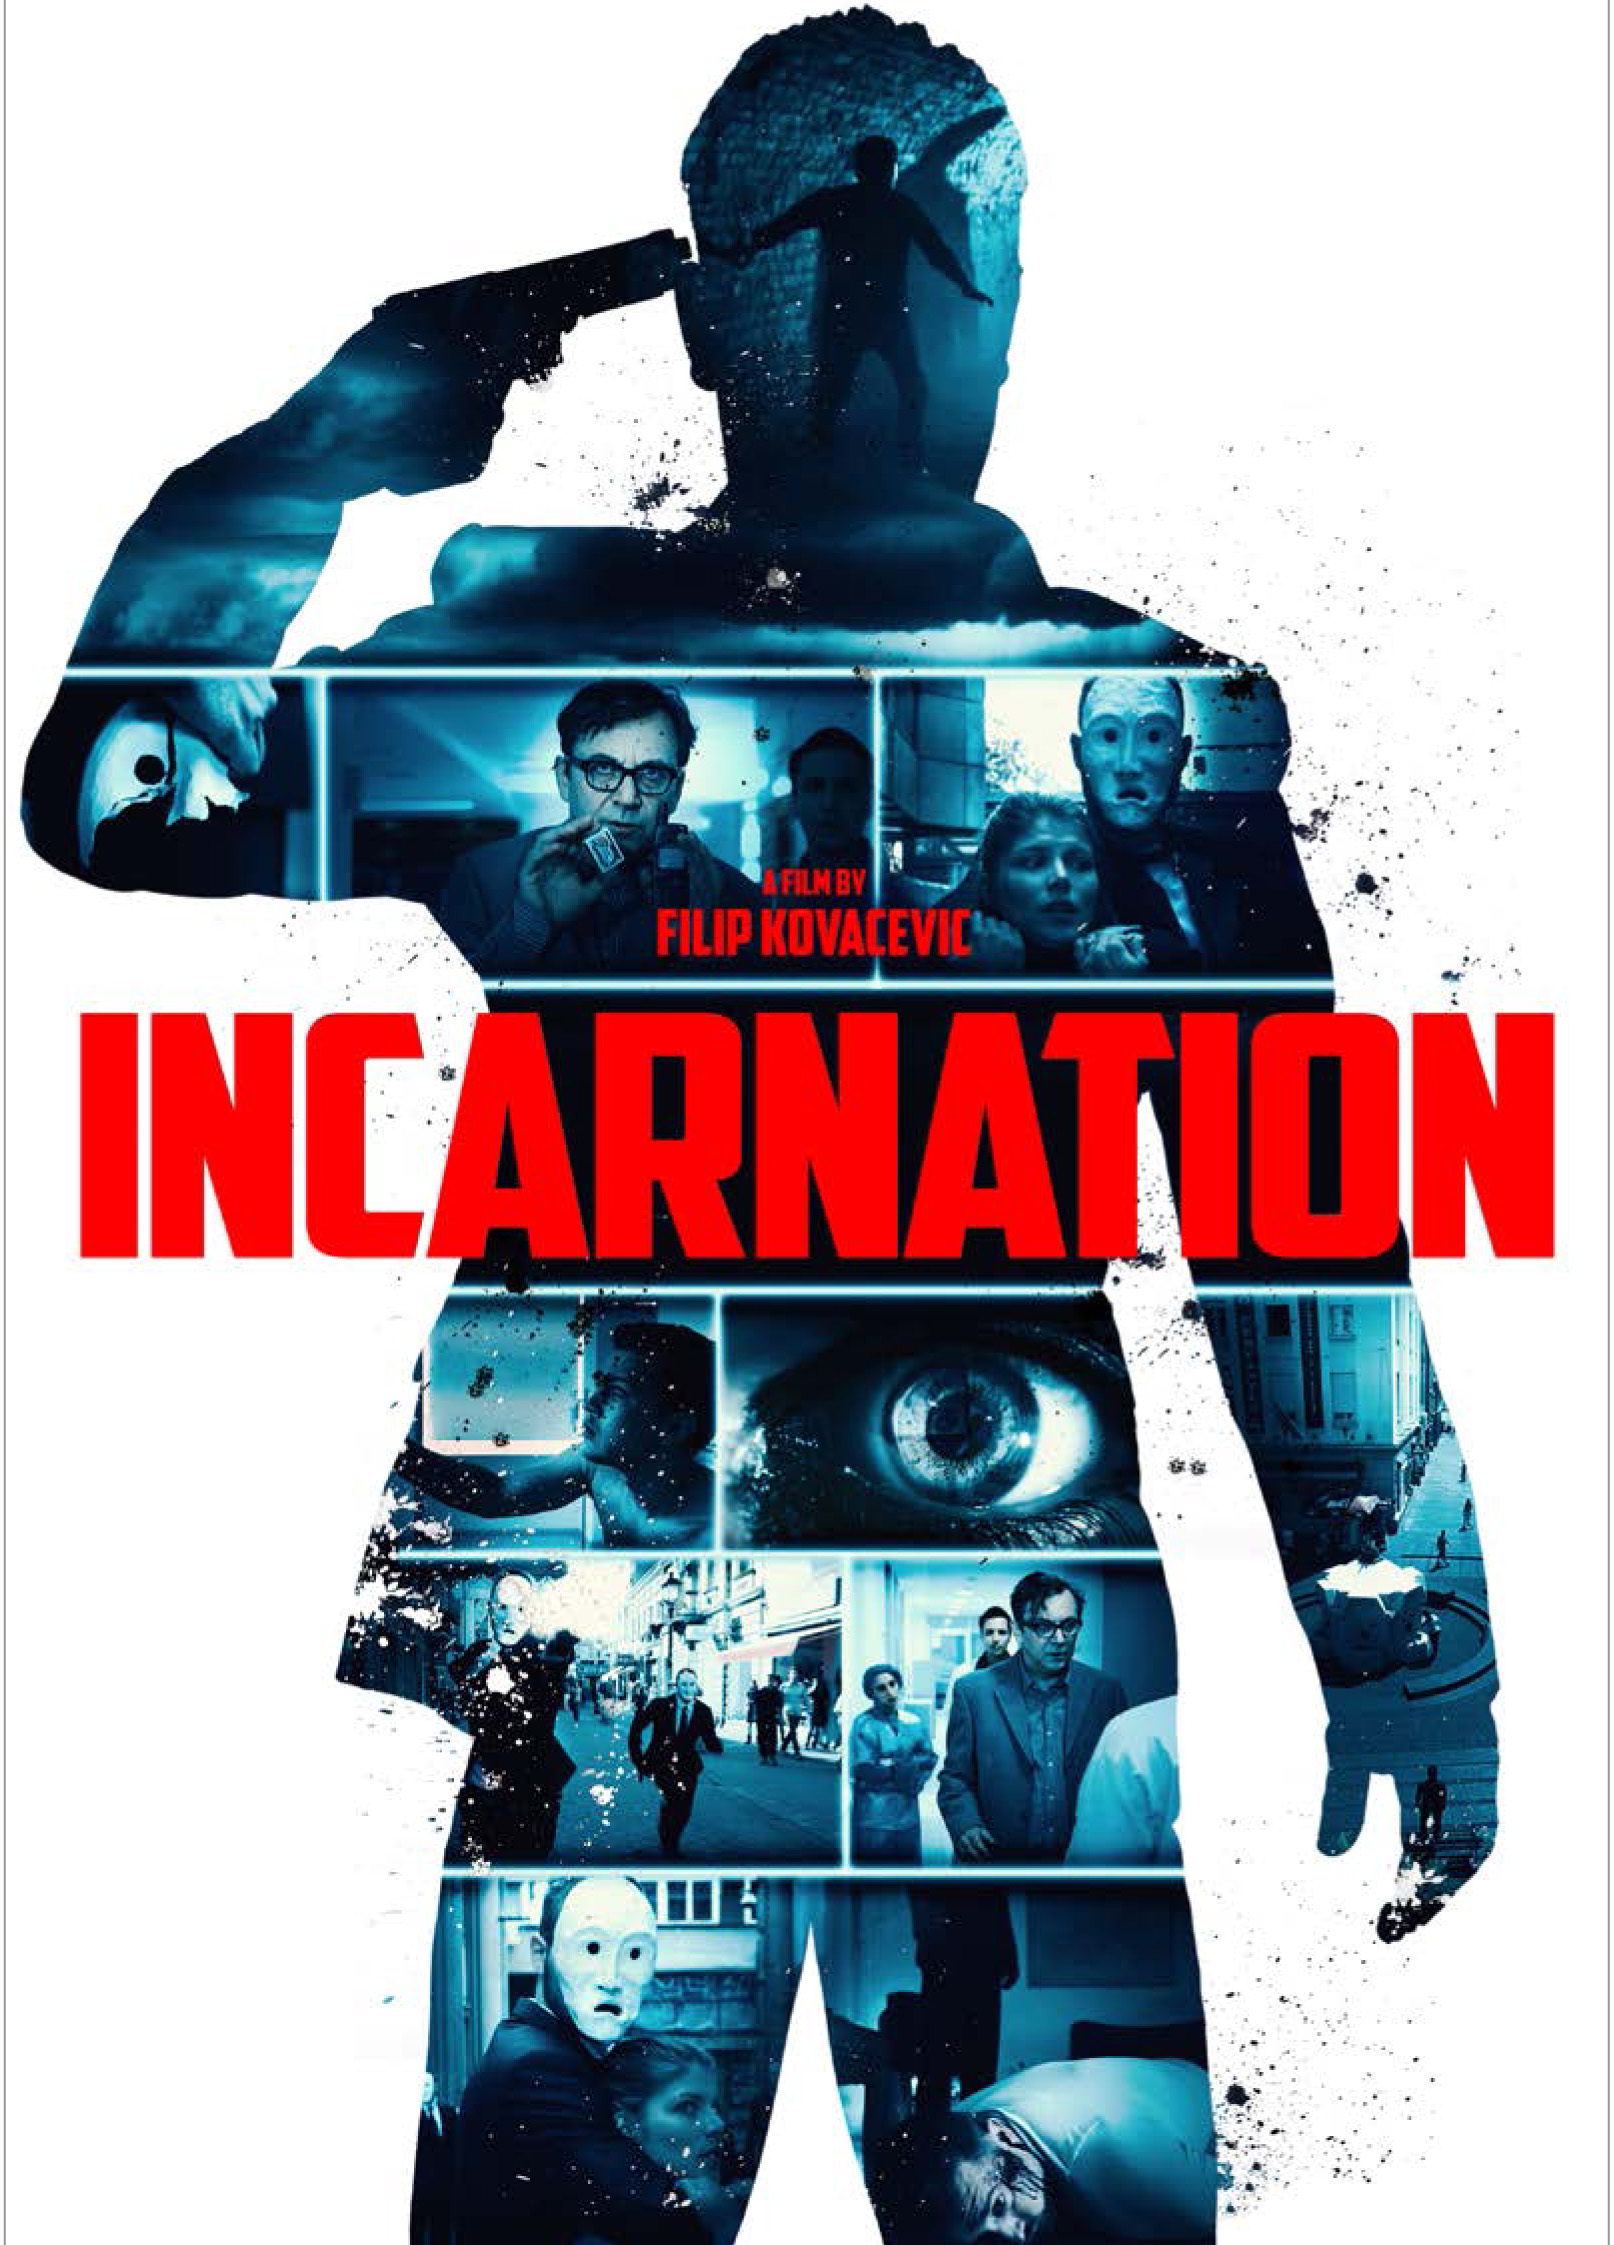 Action Sci-Fi Thriller “Incarnation” Gets North American Release